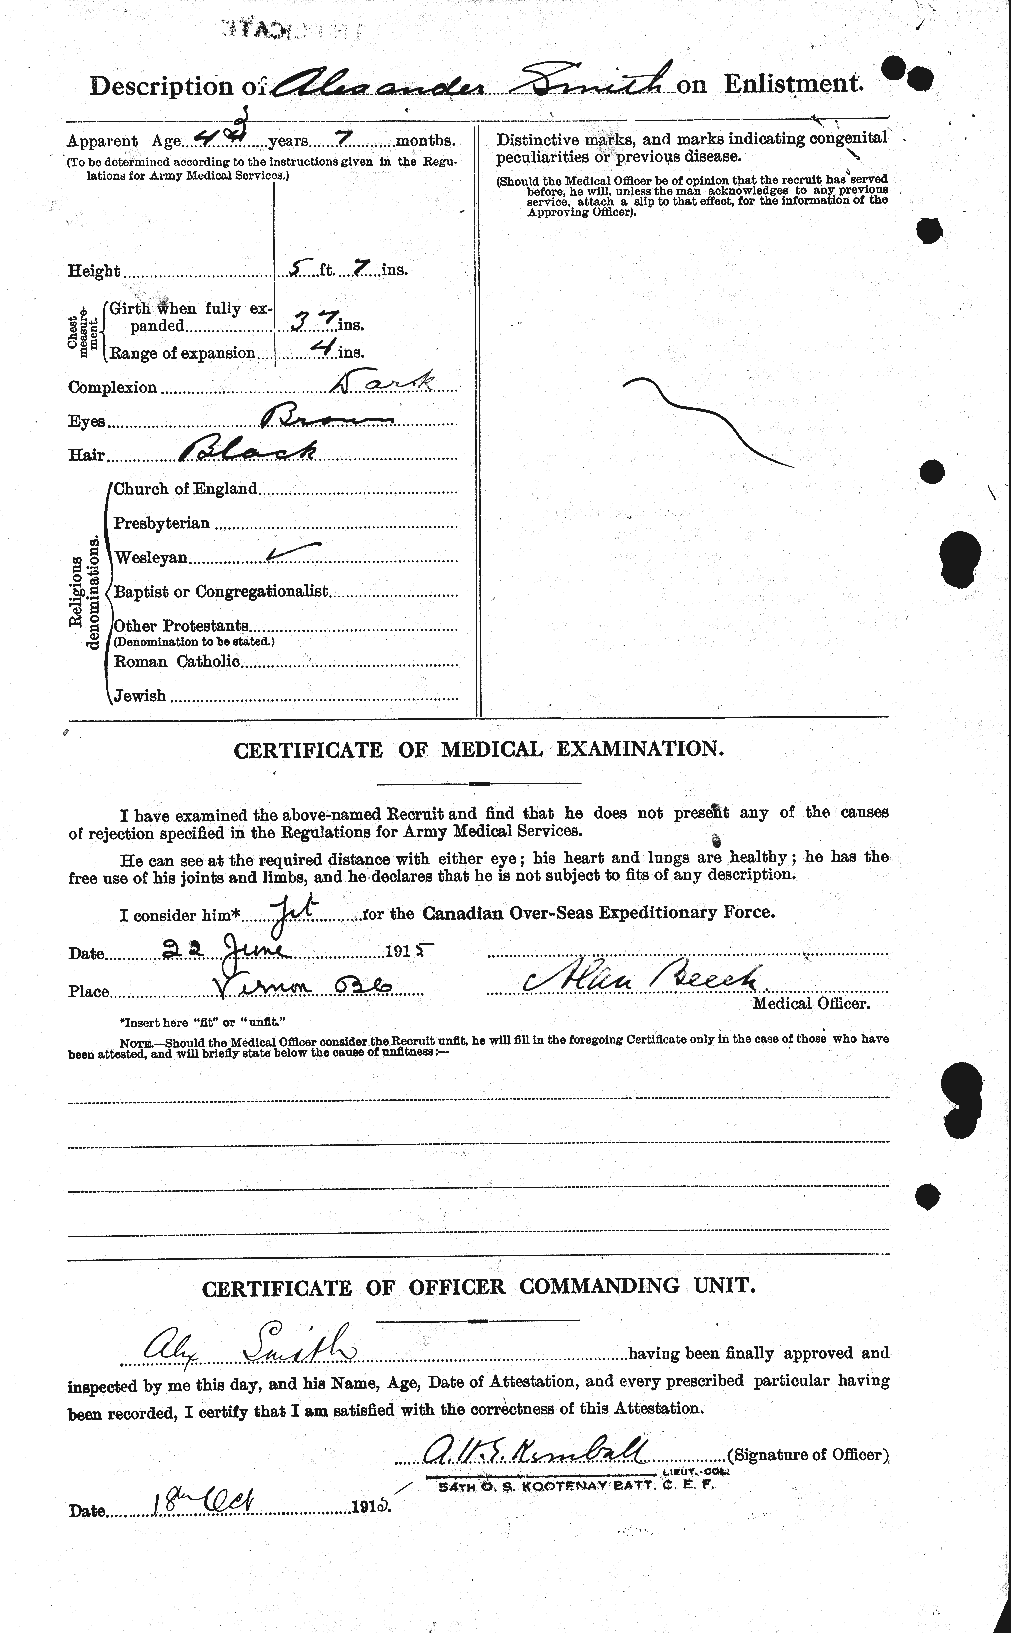 Personnel Records of the First World War - CEF 098456b